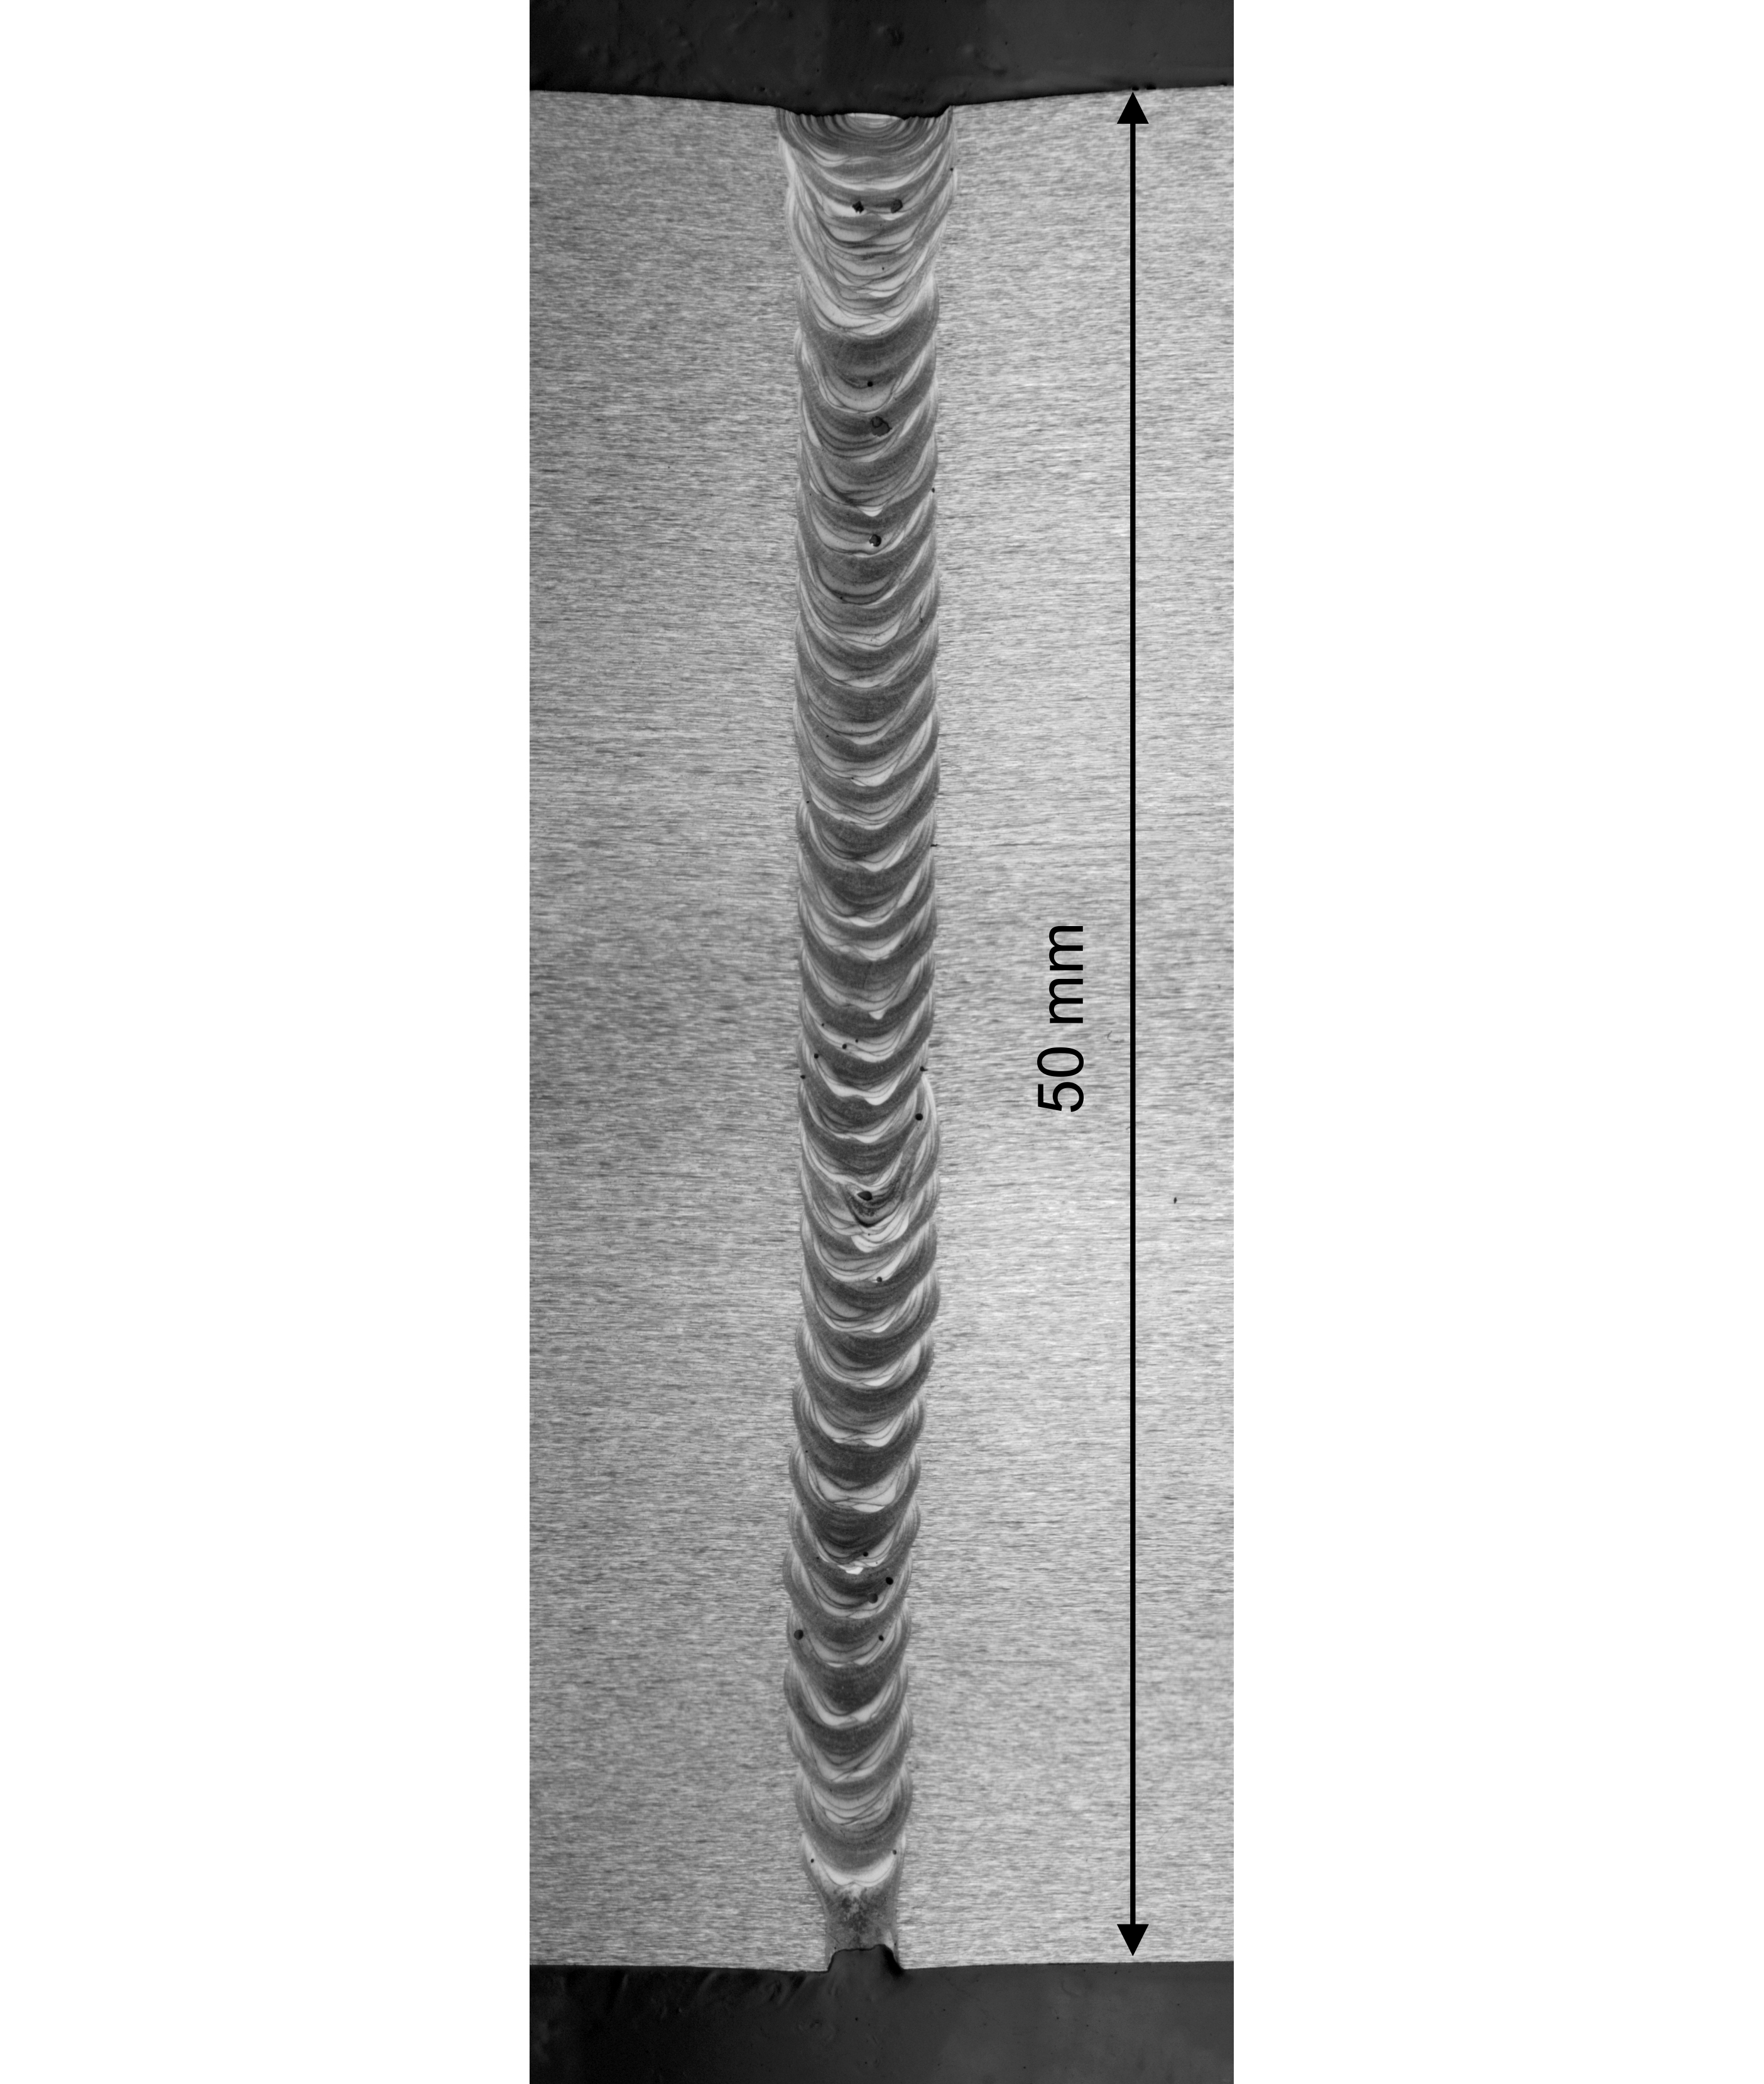 Cross section of a laser-MPNG weld seam made of a naturally hard aluminum alloy